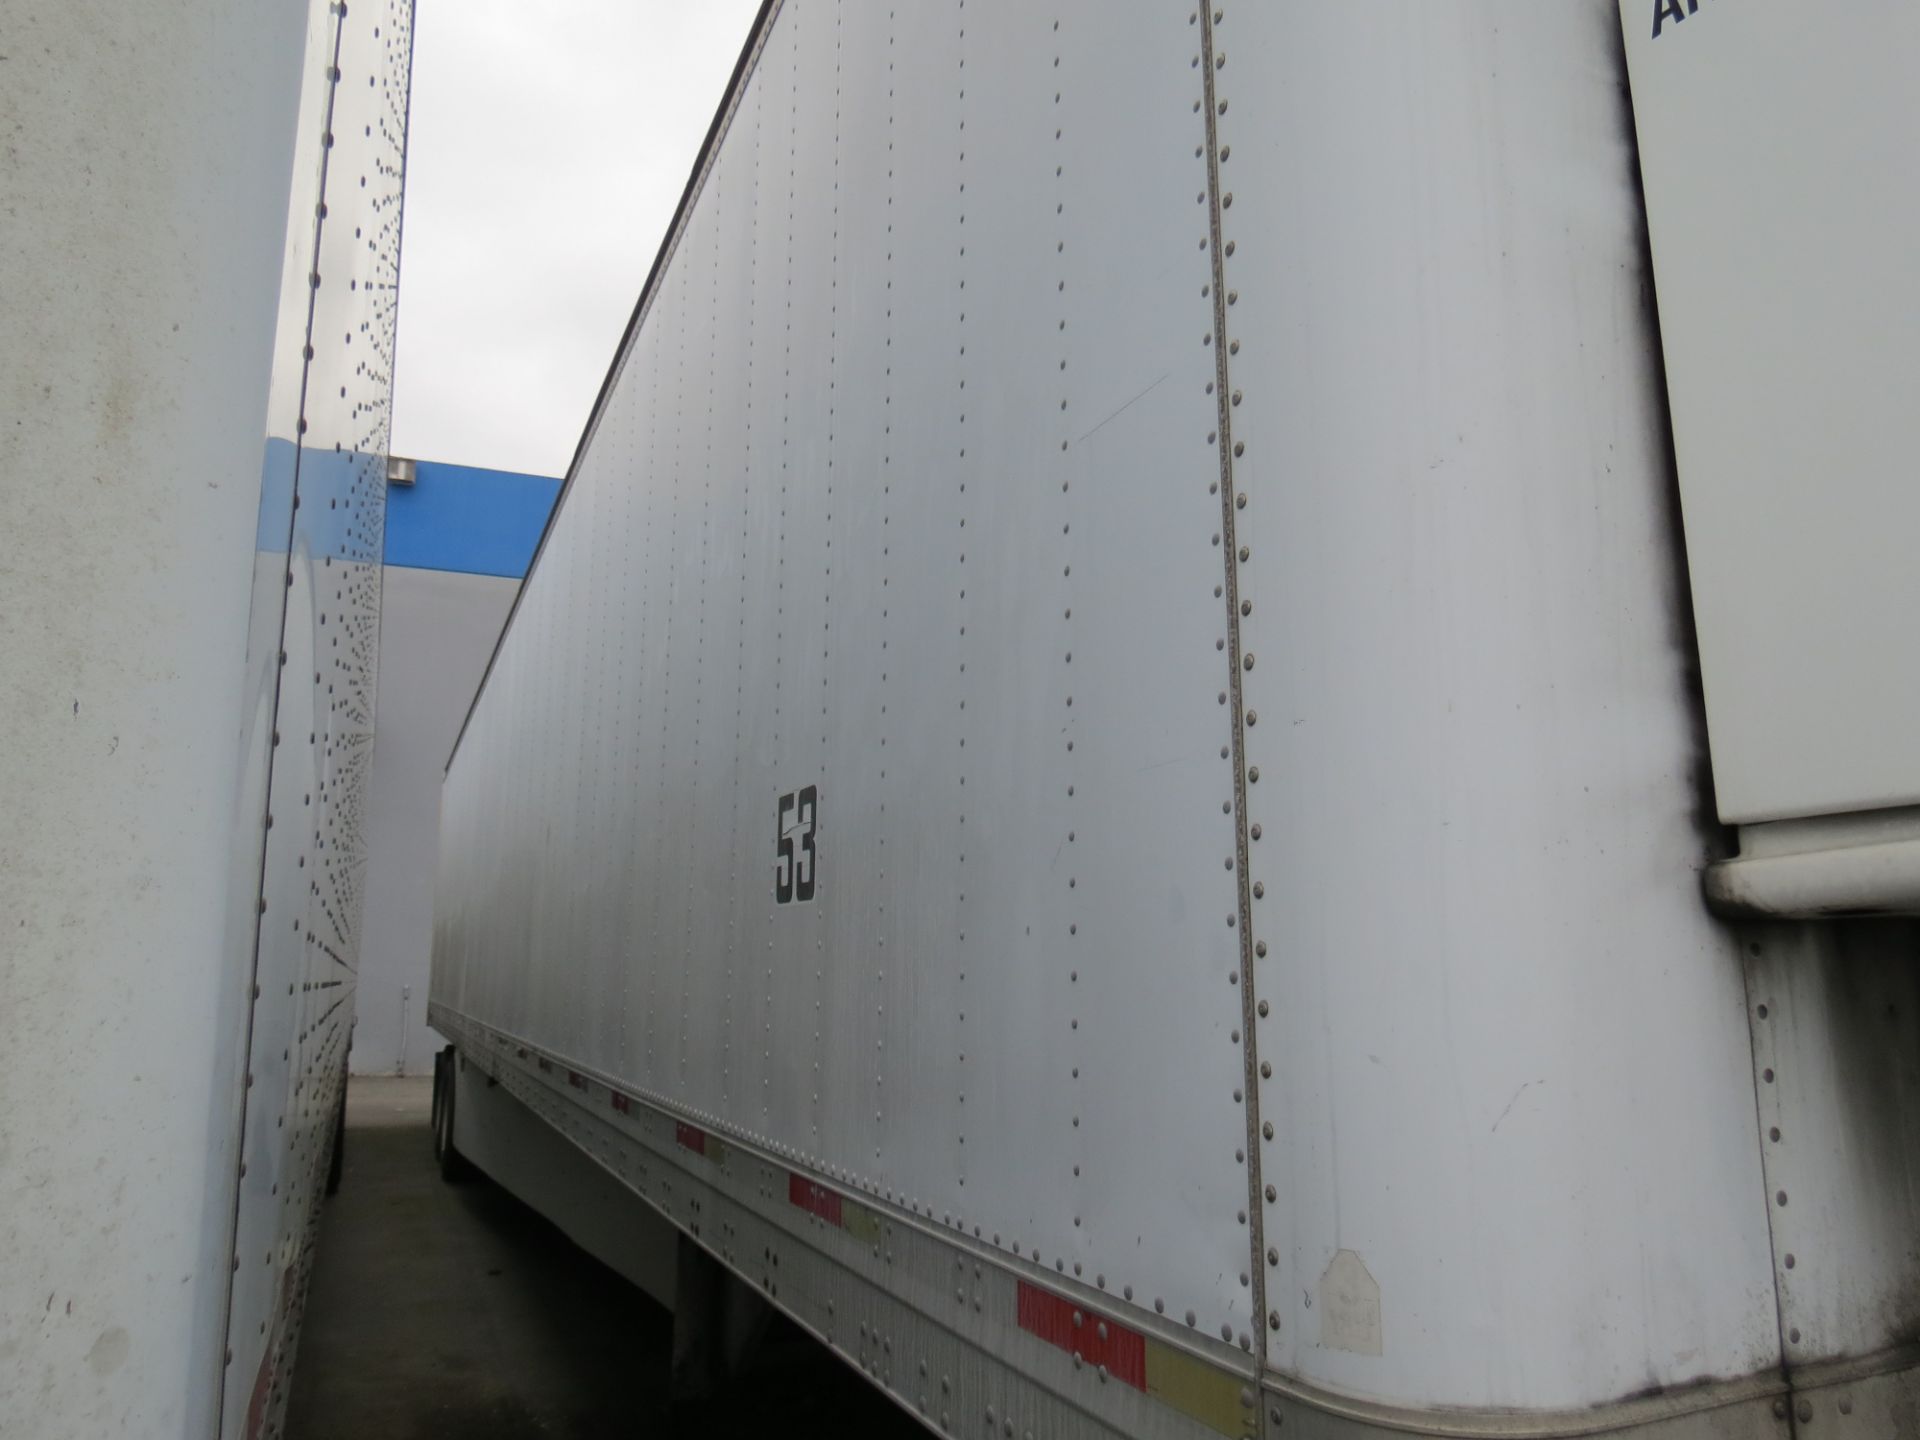 1997 Trailmobile 53' Thermo King Smart Reefer #3 Trailer, Model - 01AC-1UAY, VIN: 1PT01ACHAW9001358, - Image 4 of 9